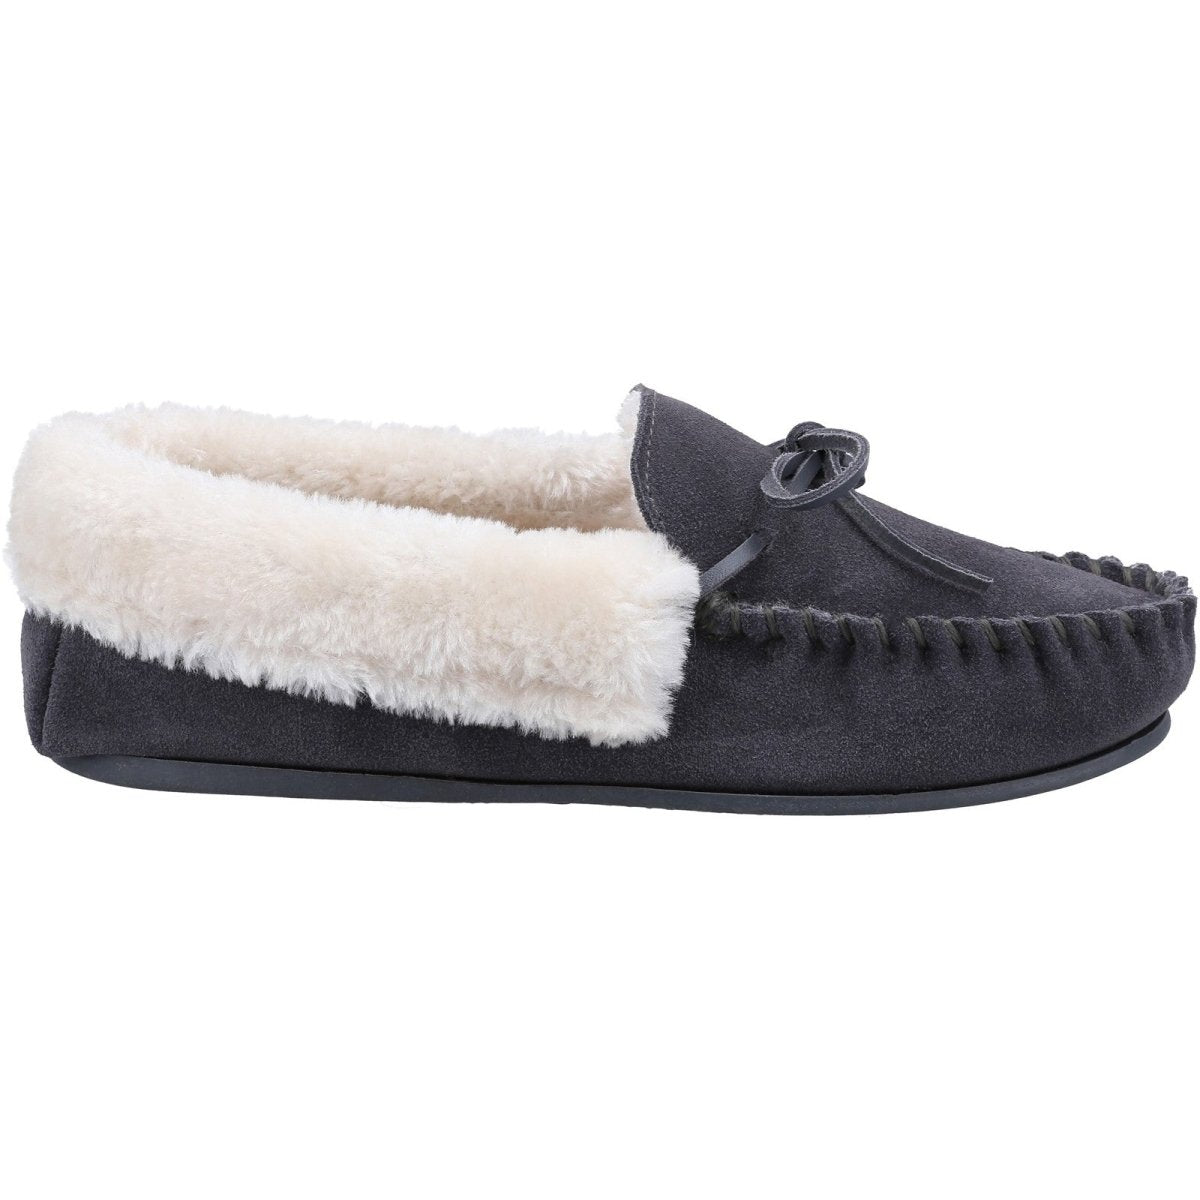 Cotswold Sopworth Suede Ladies Moccasin Slippers - Shoe Store Direct